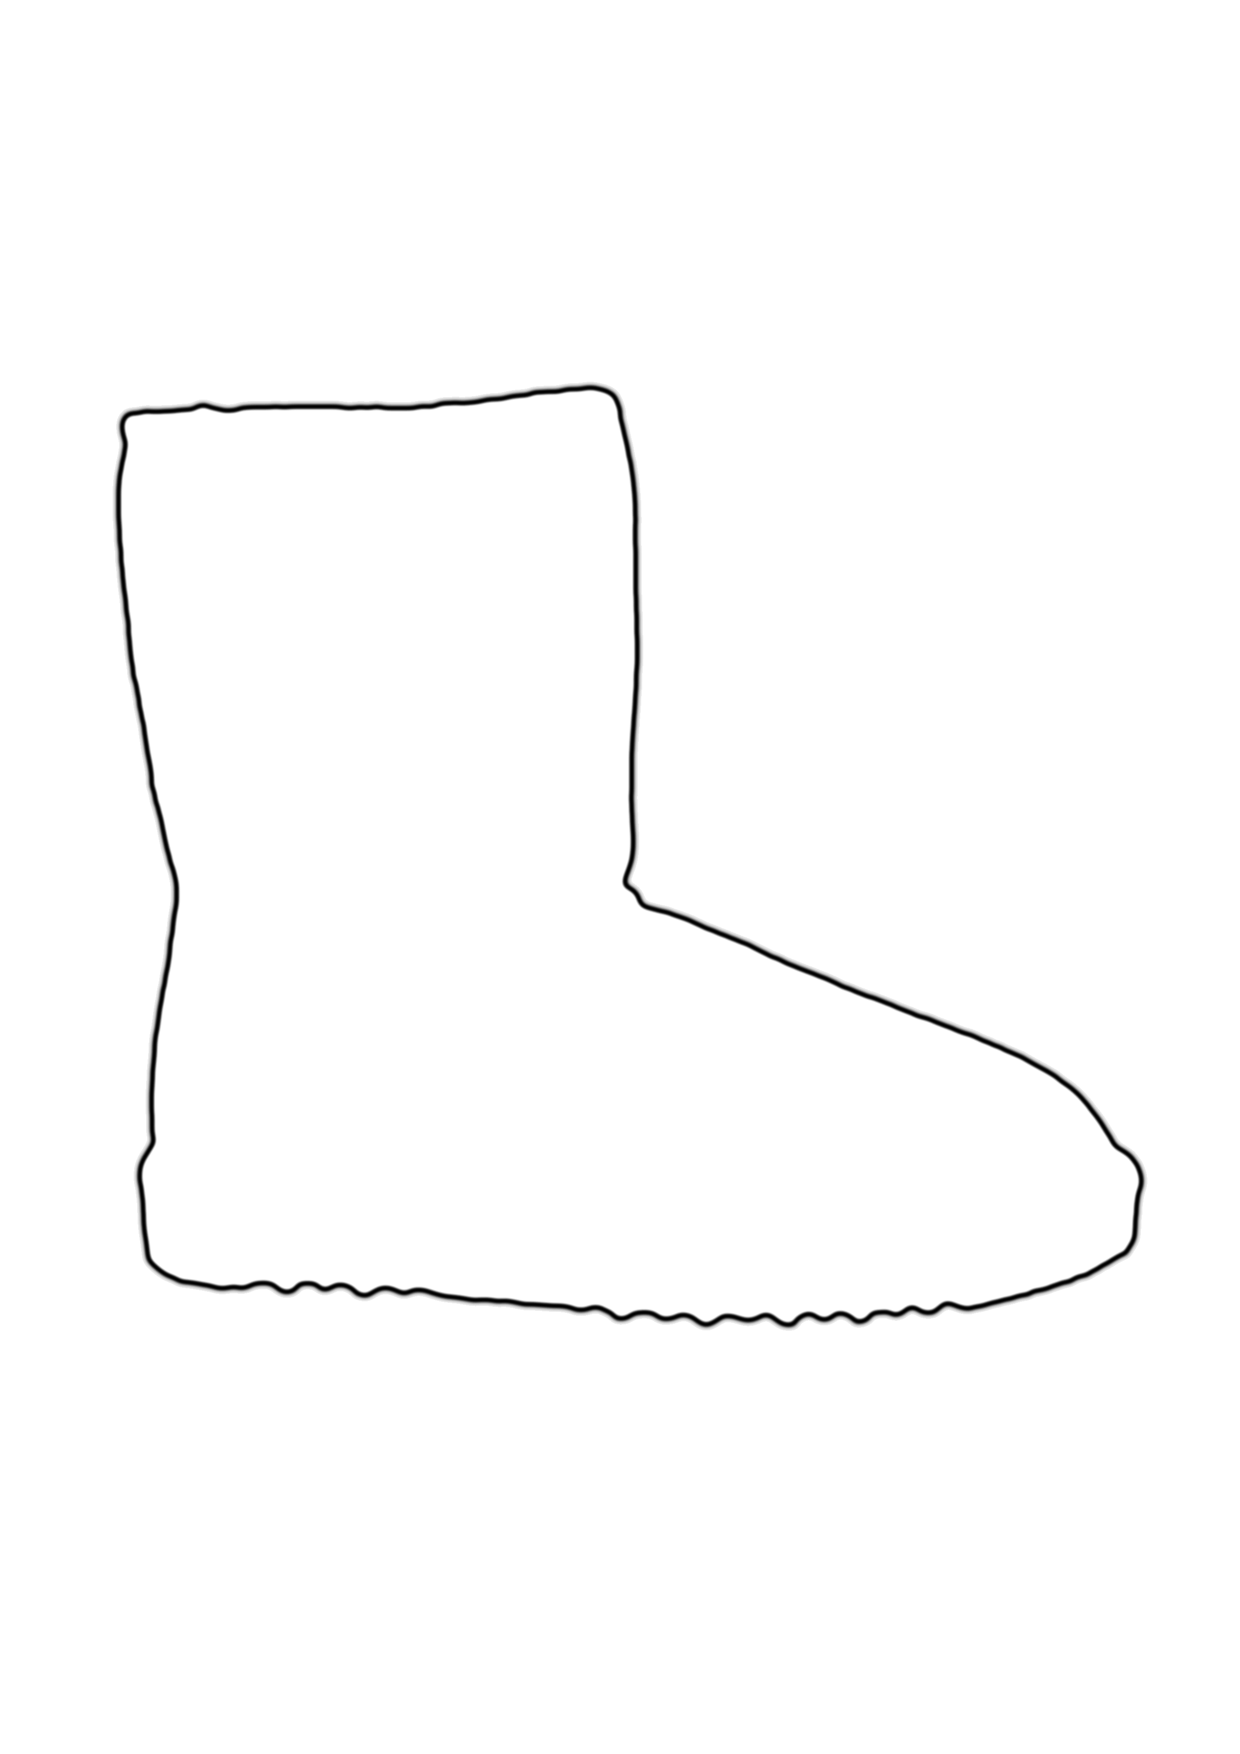 The Boot Kidz   Outline Of Wellington Boot Stencil For Colouring In